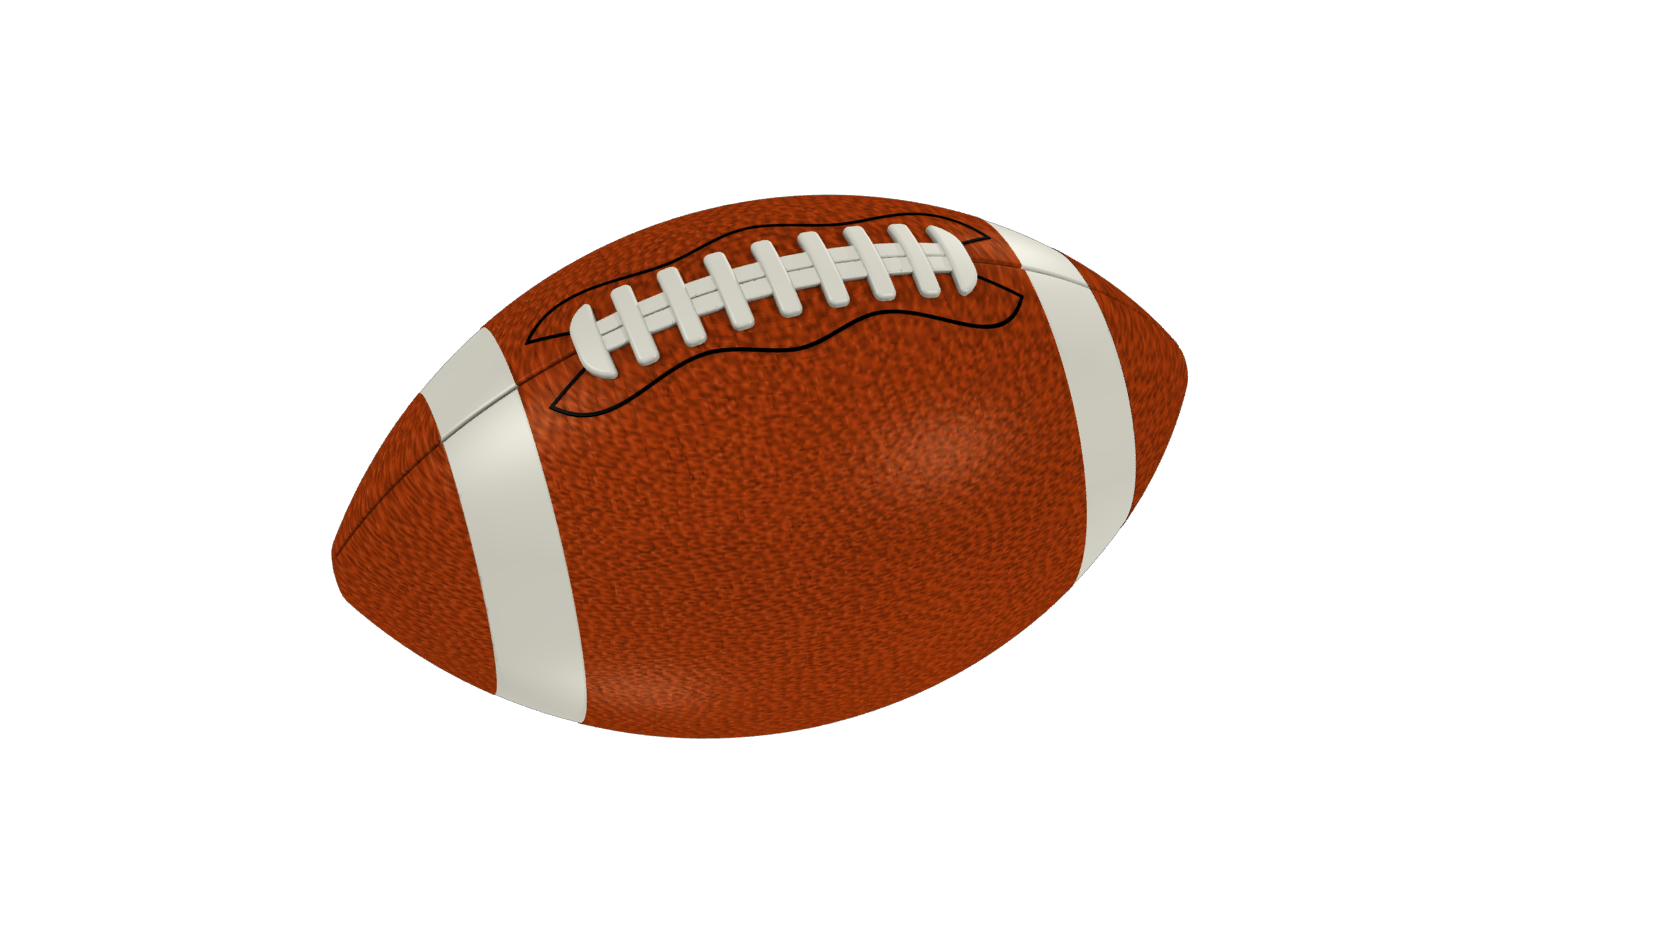 American Football PNG Images